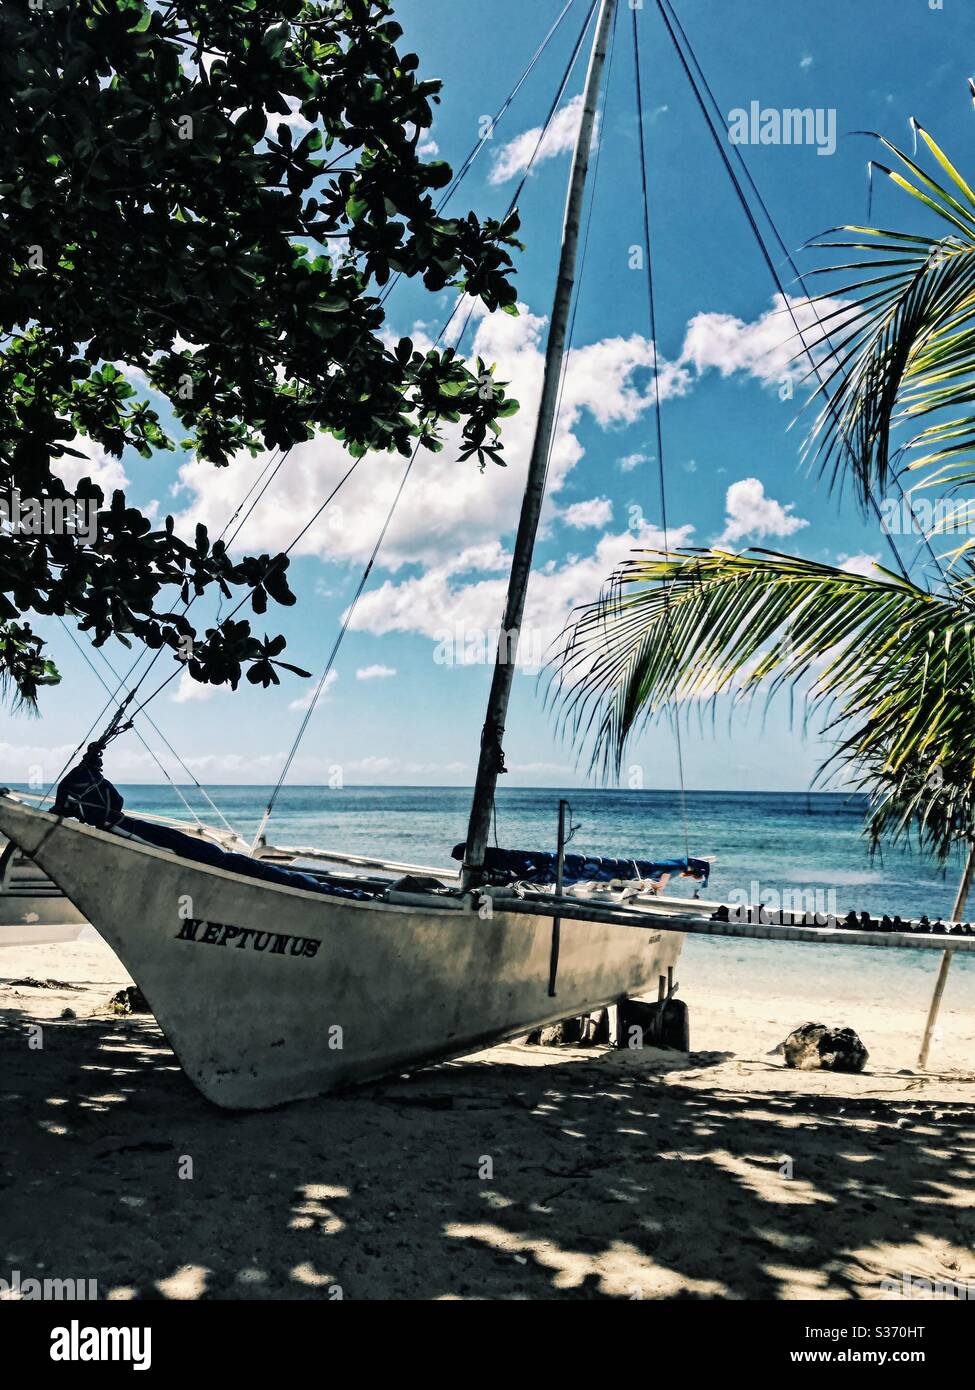 Boat on exotic beach in San Juan, Siquijor, Philippines. Stock Photo